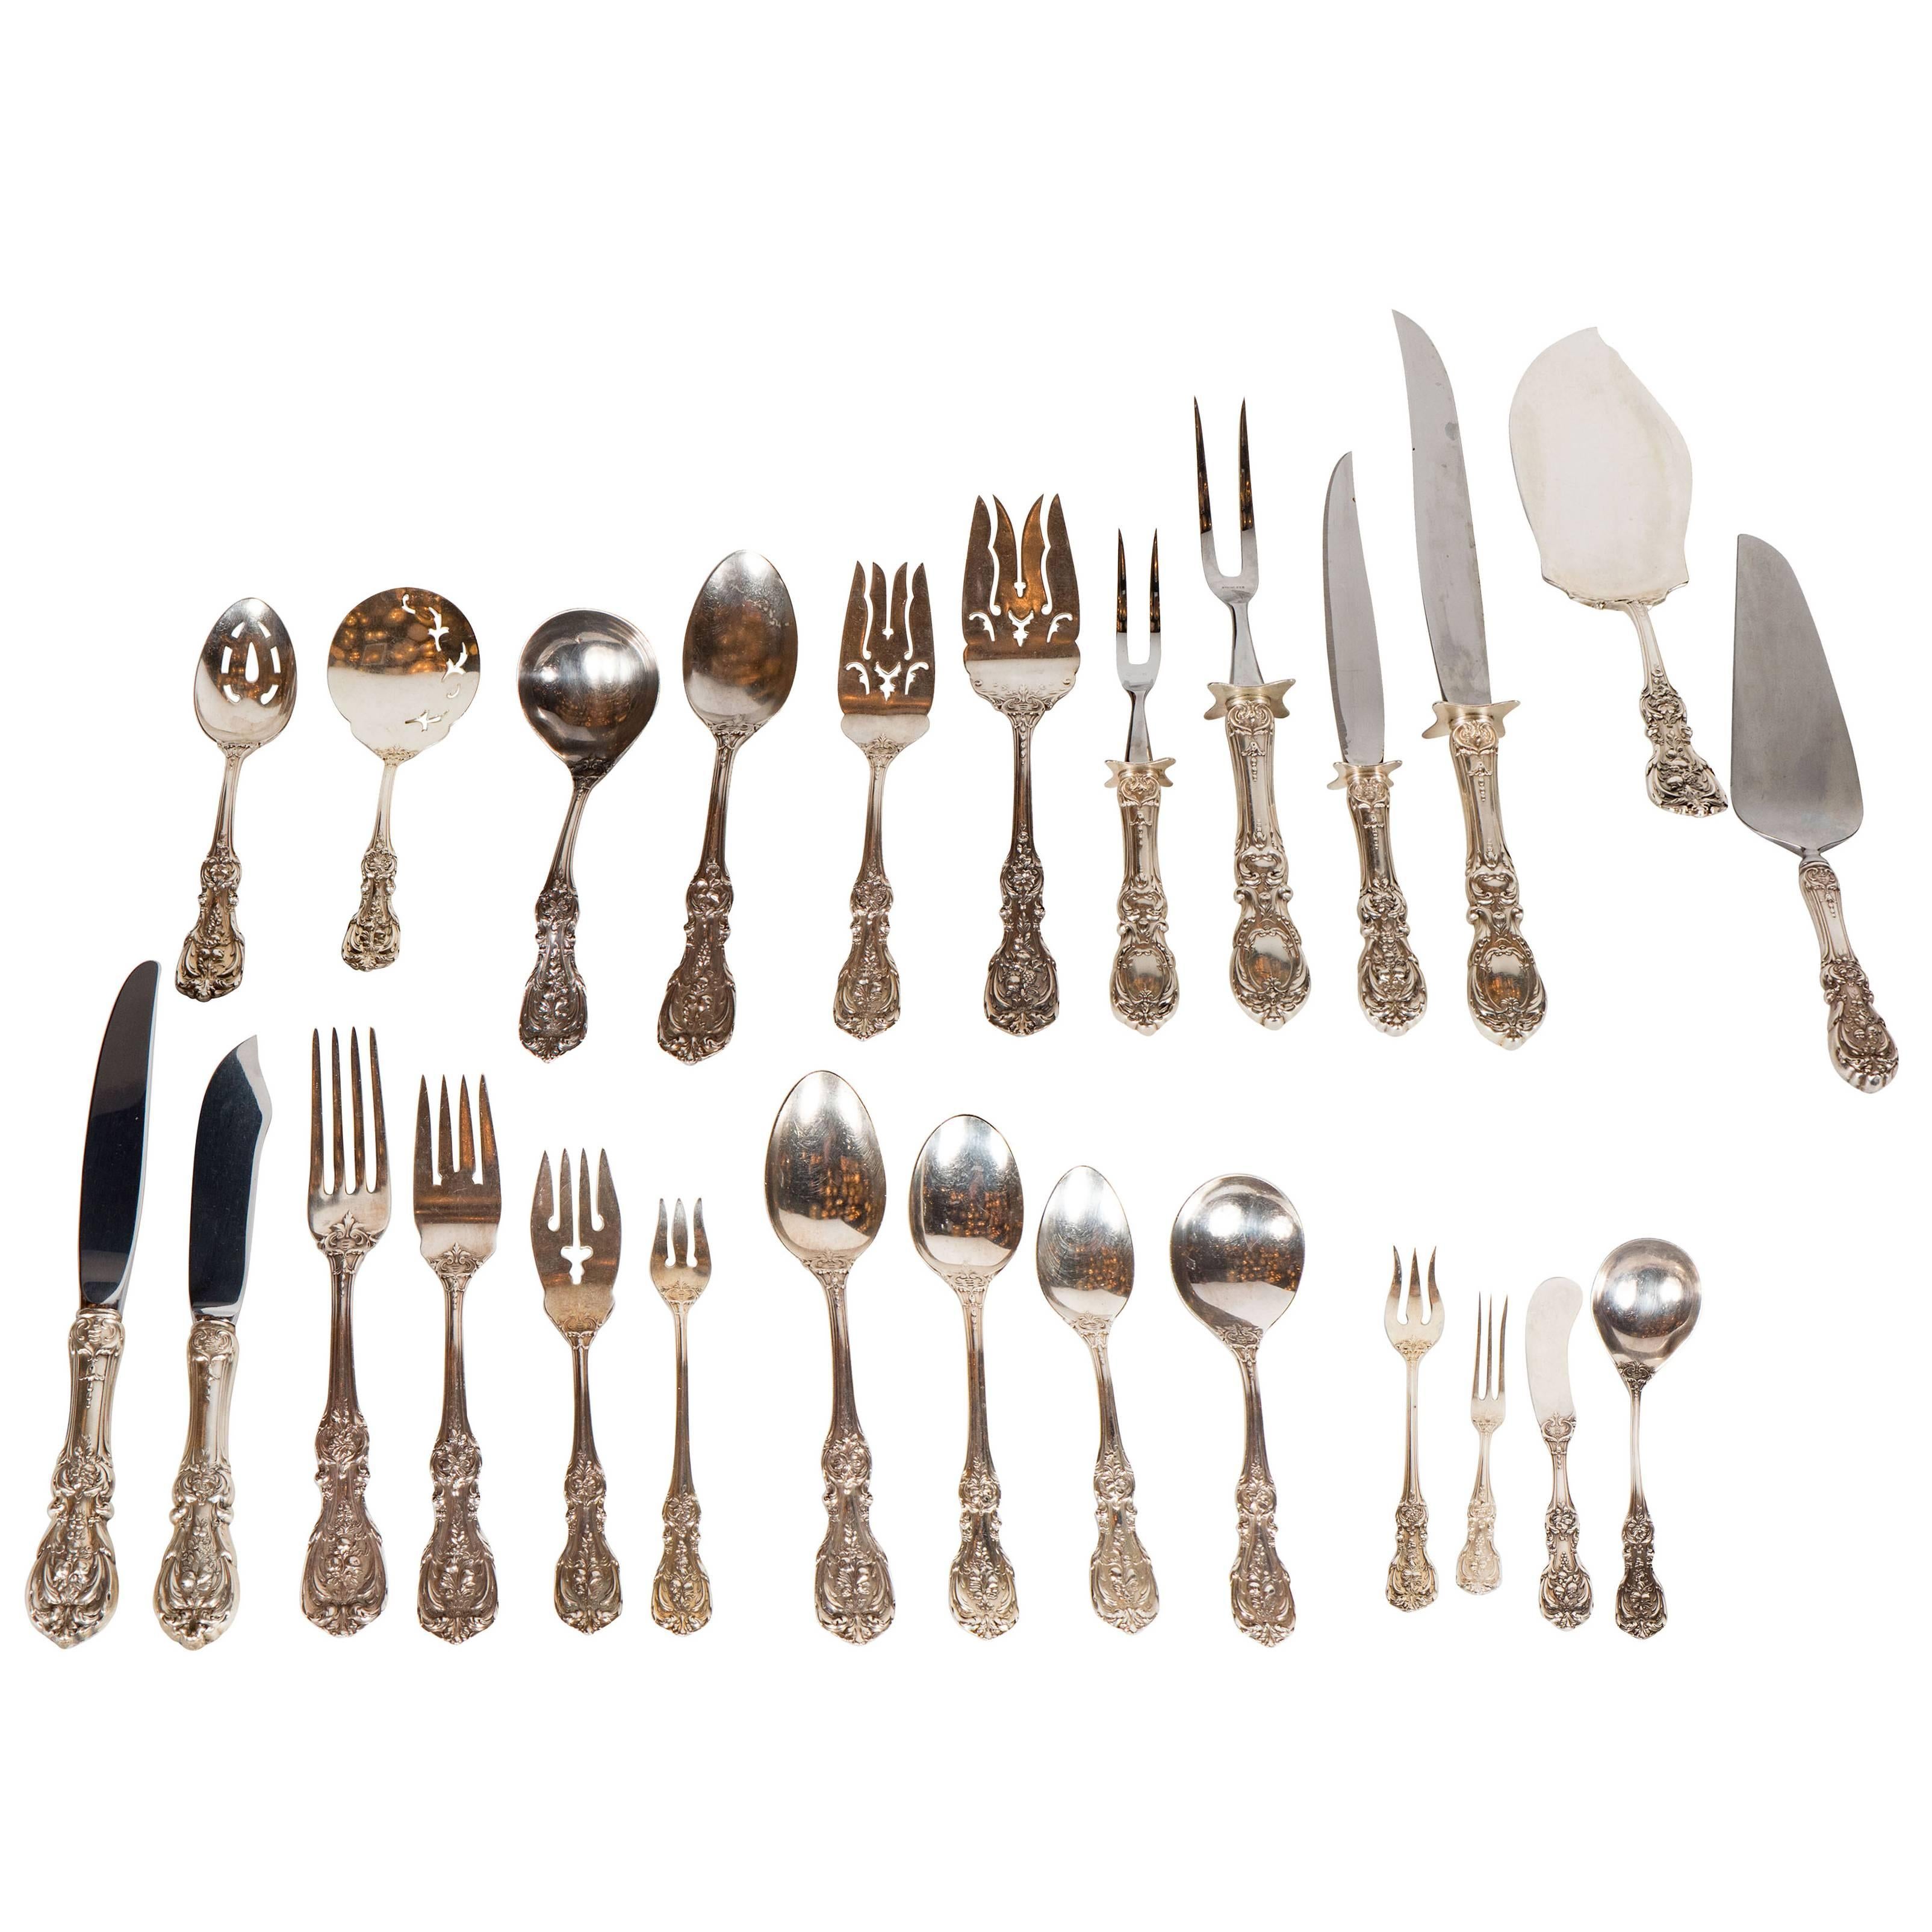 205 Piece Sterling Flatware Service Designed by Ernest Meyers for Reed & Barton